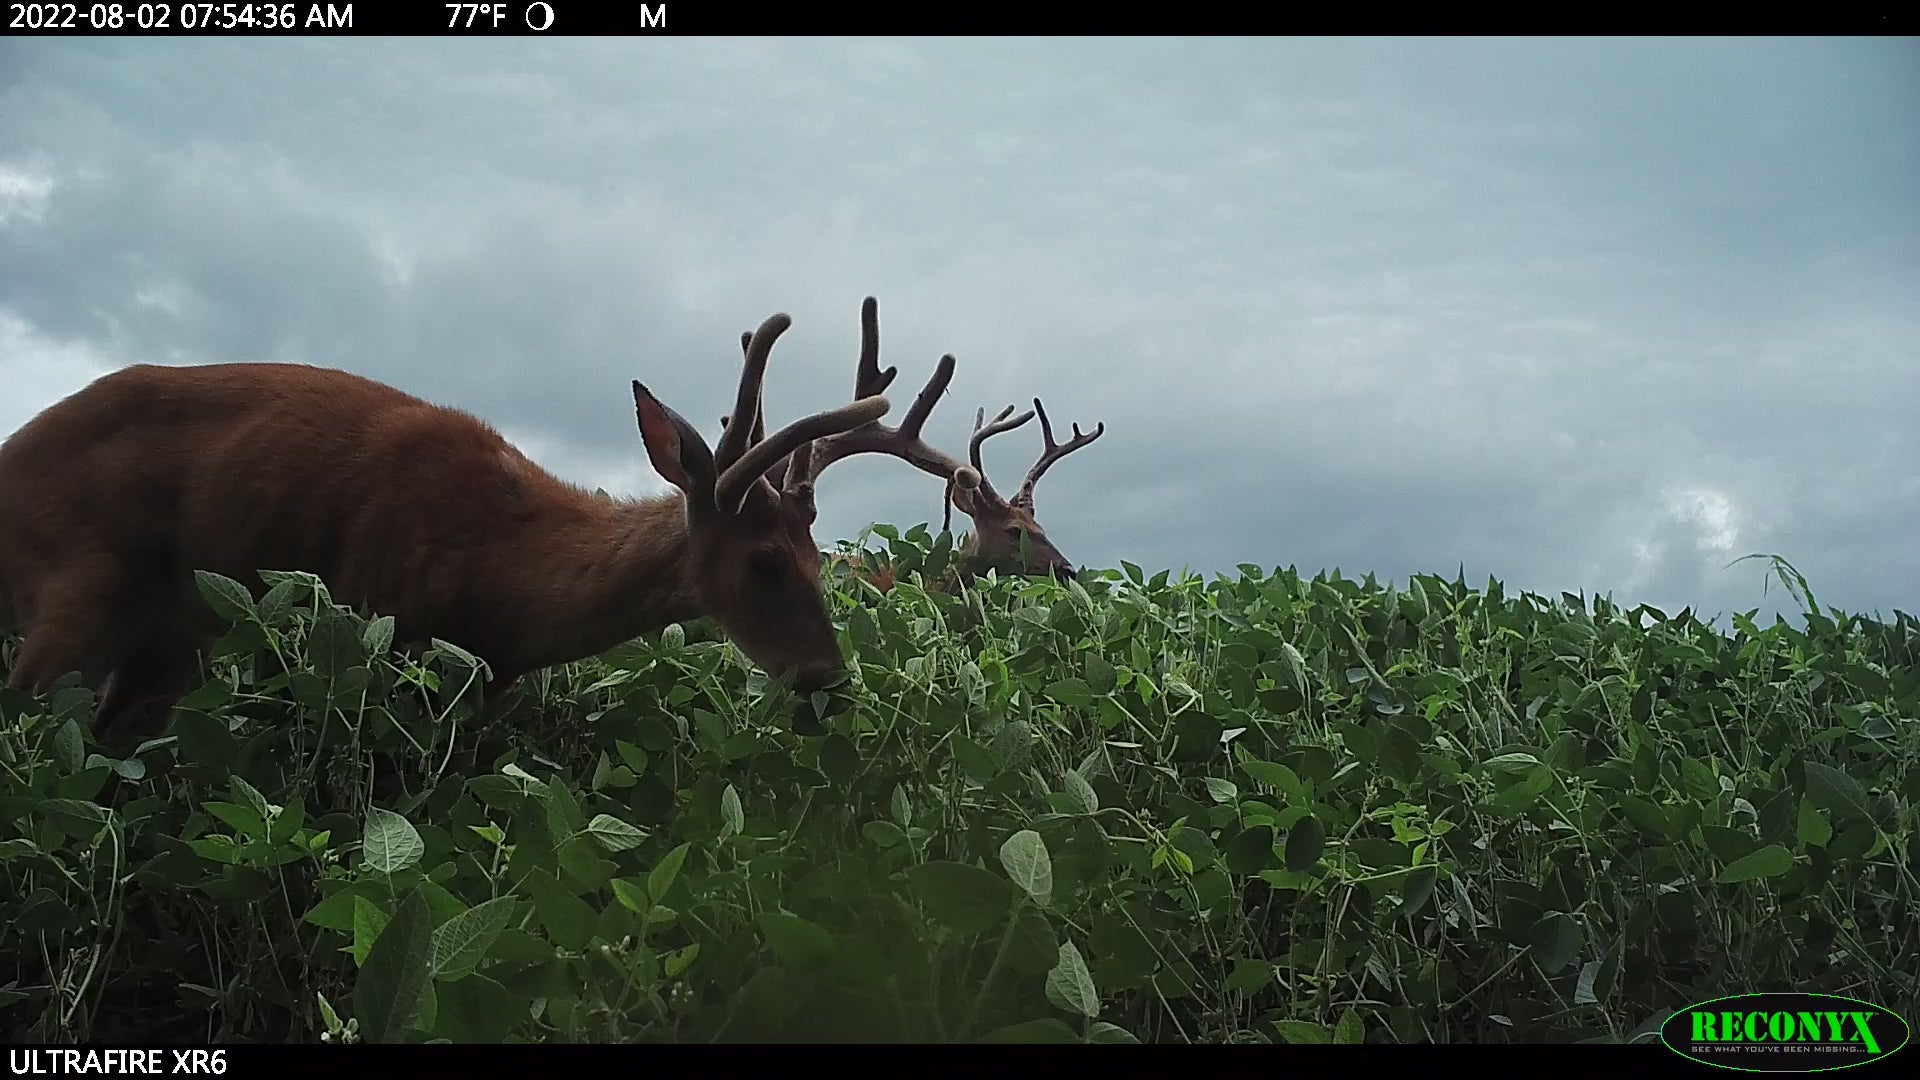 Video of Monster White Tail Buck grazing in Tecomate Glyphosate tolerant soy bean seed field.